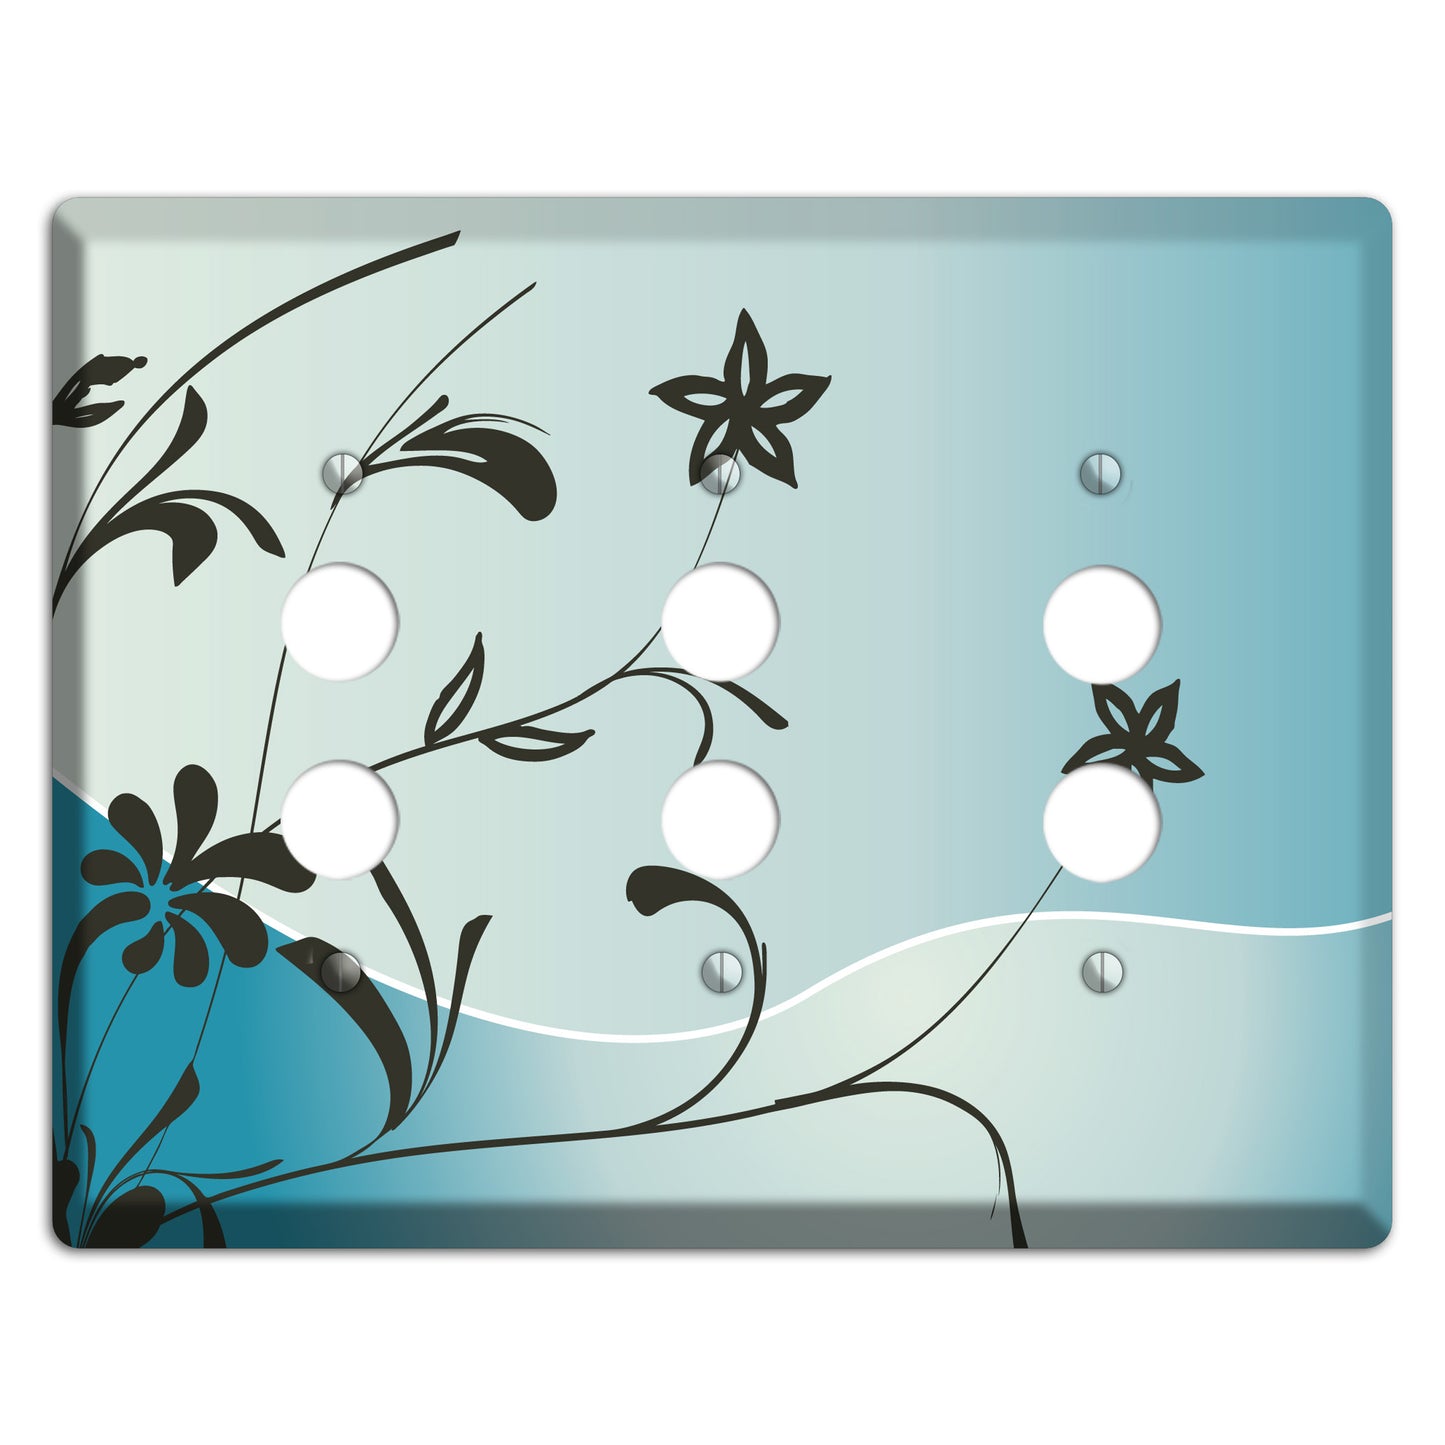 Blue-grey Floral Sprig 3 Pushbutton Wallplate